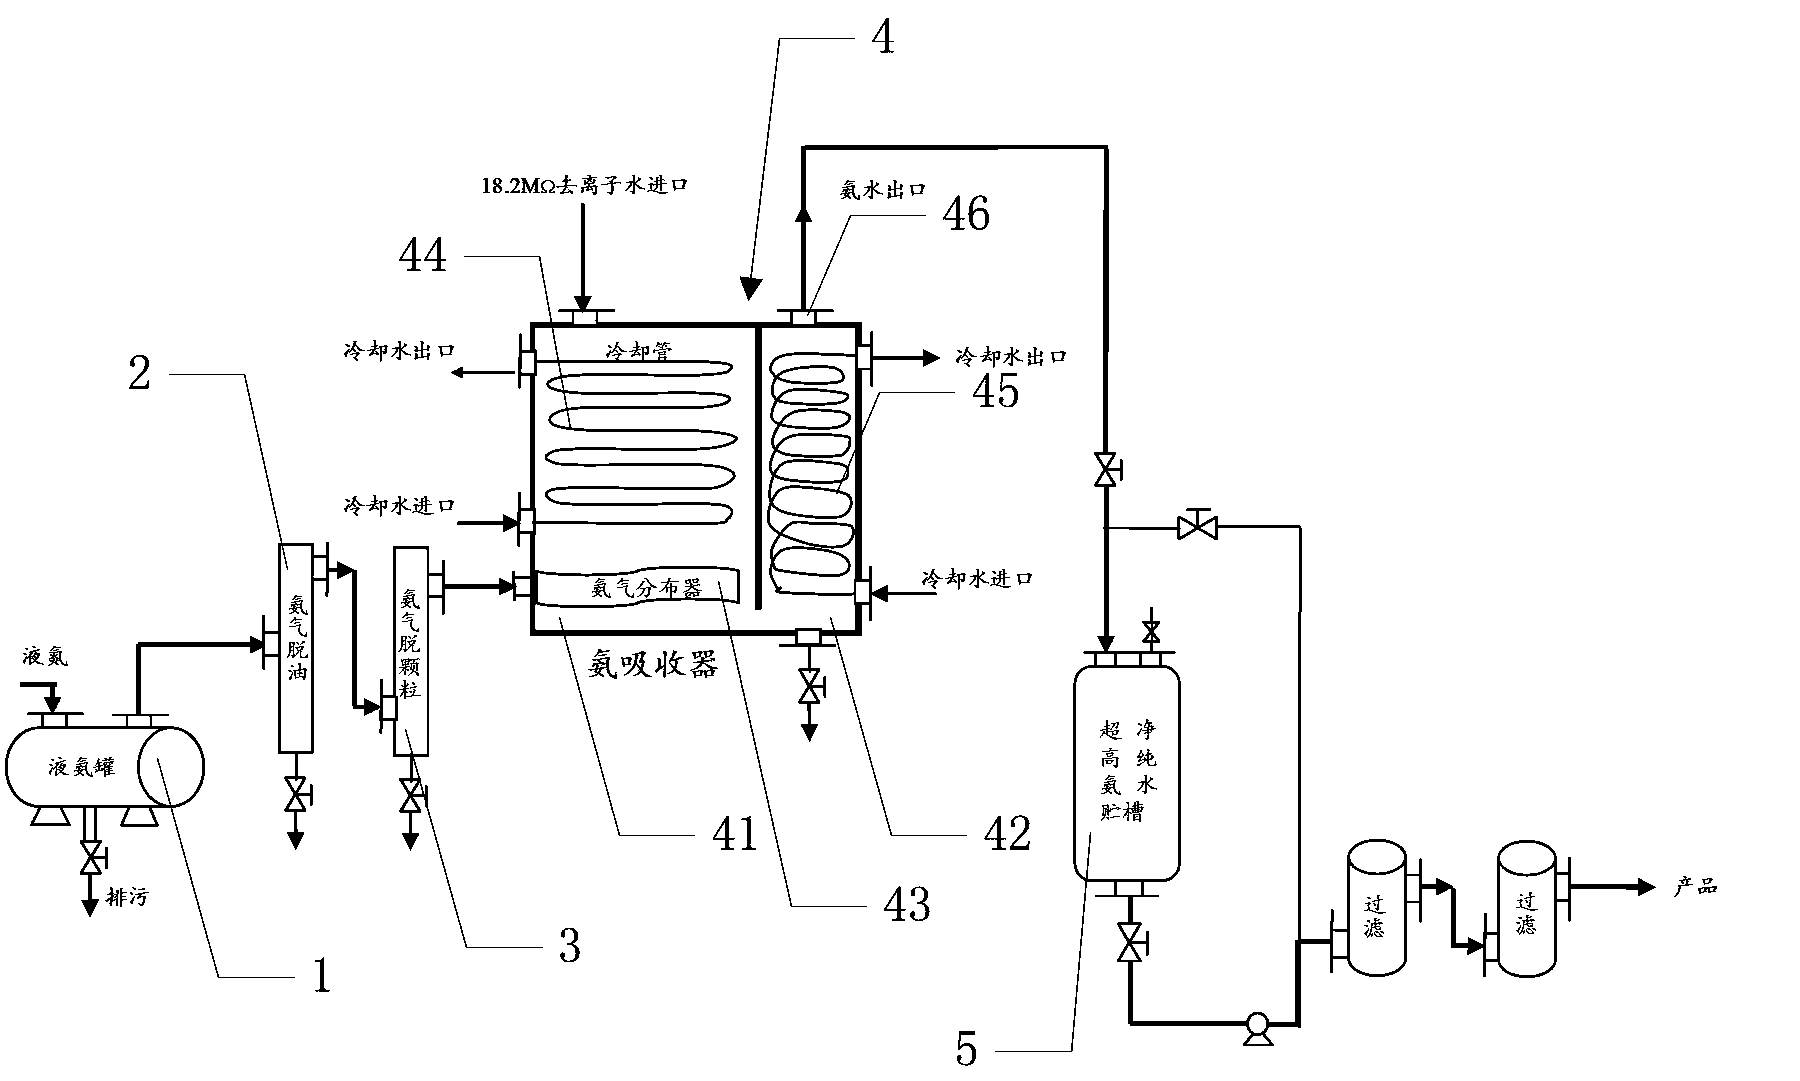 Ammonia absorption device and method for preparing ultra-clean high-purity ammonium hydroxide